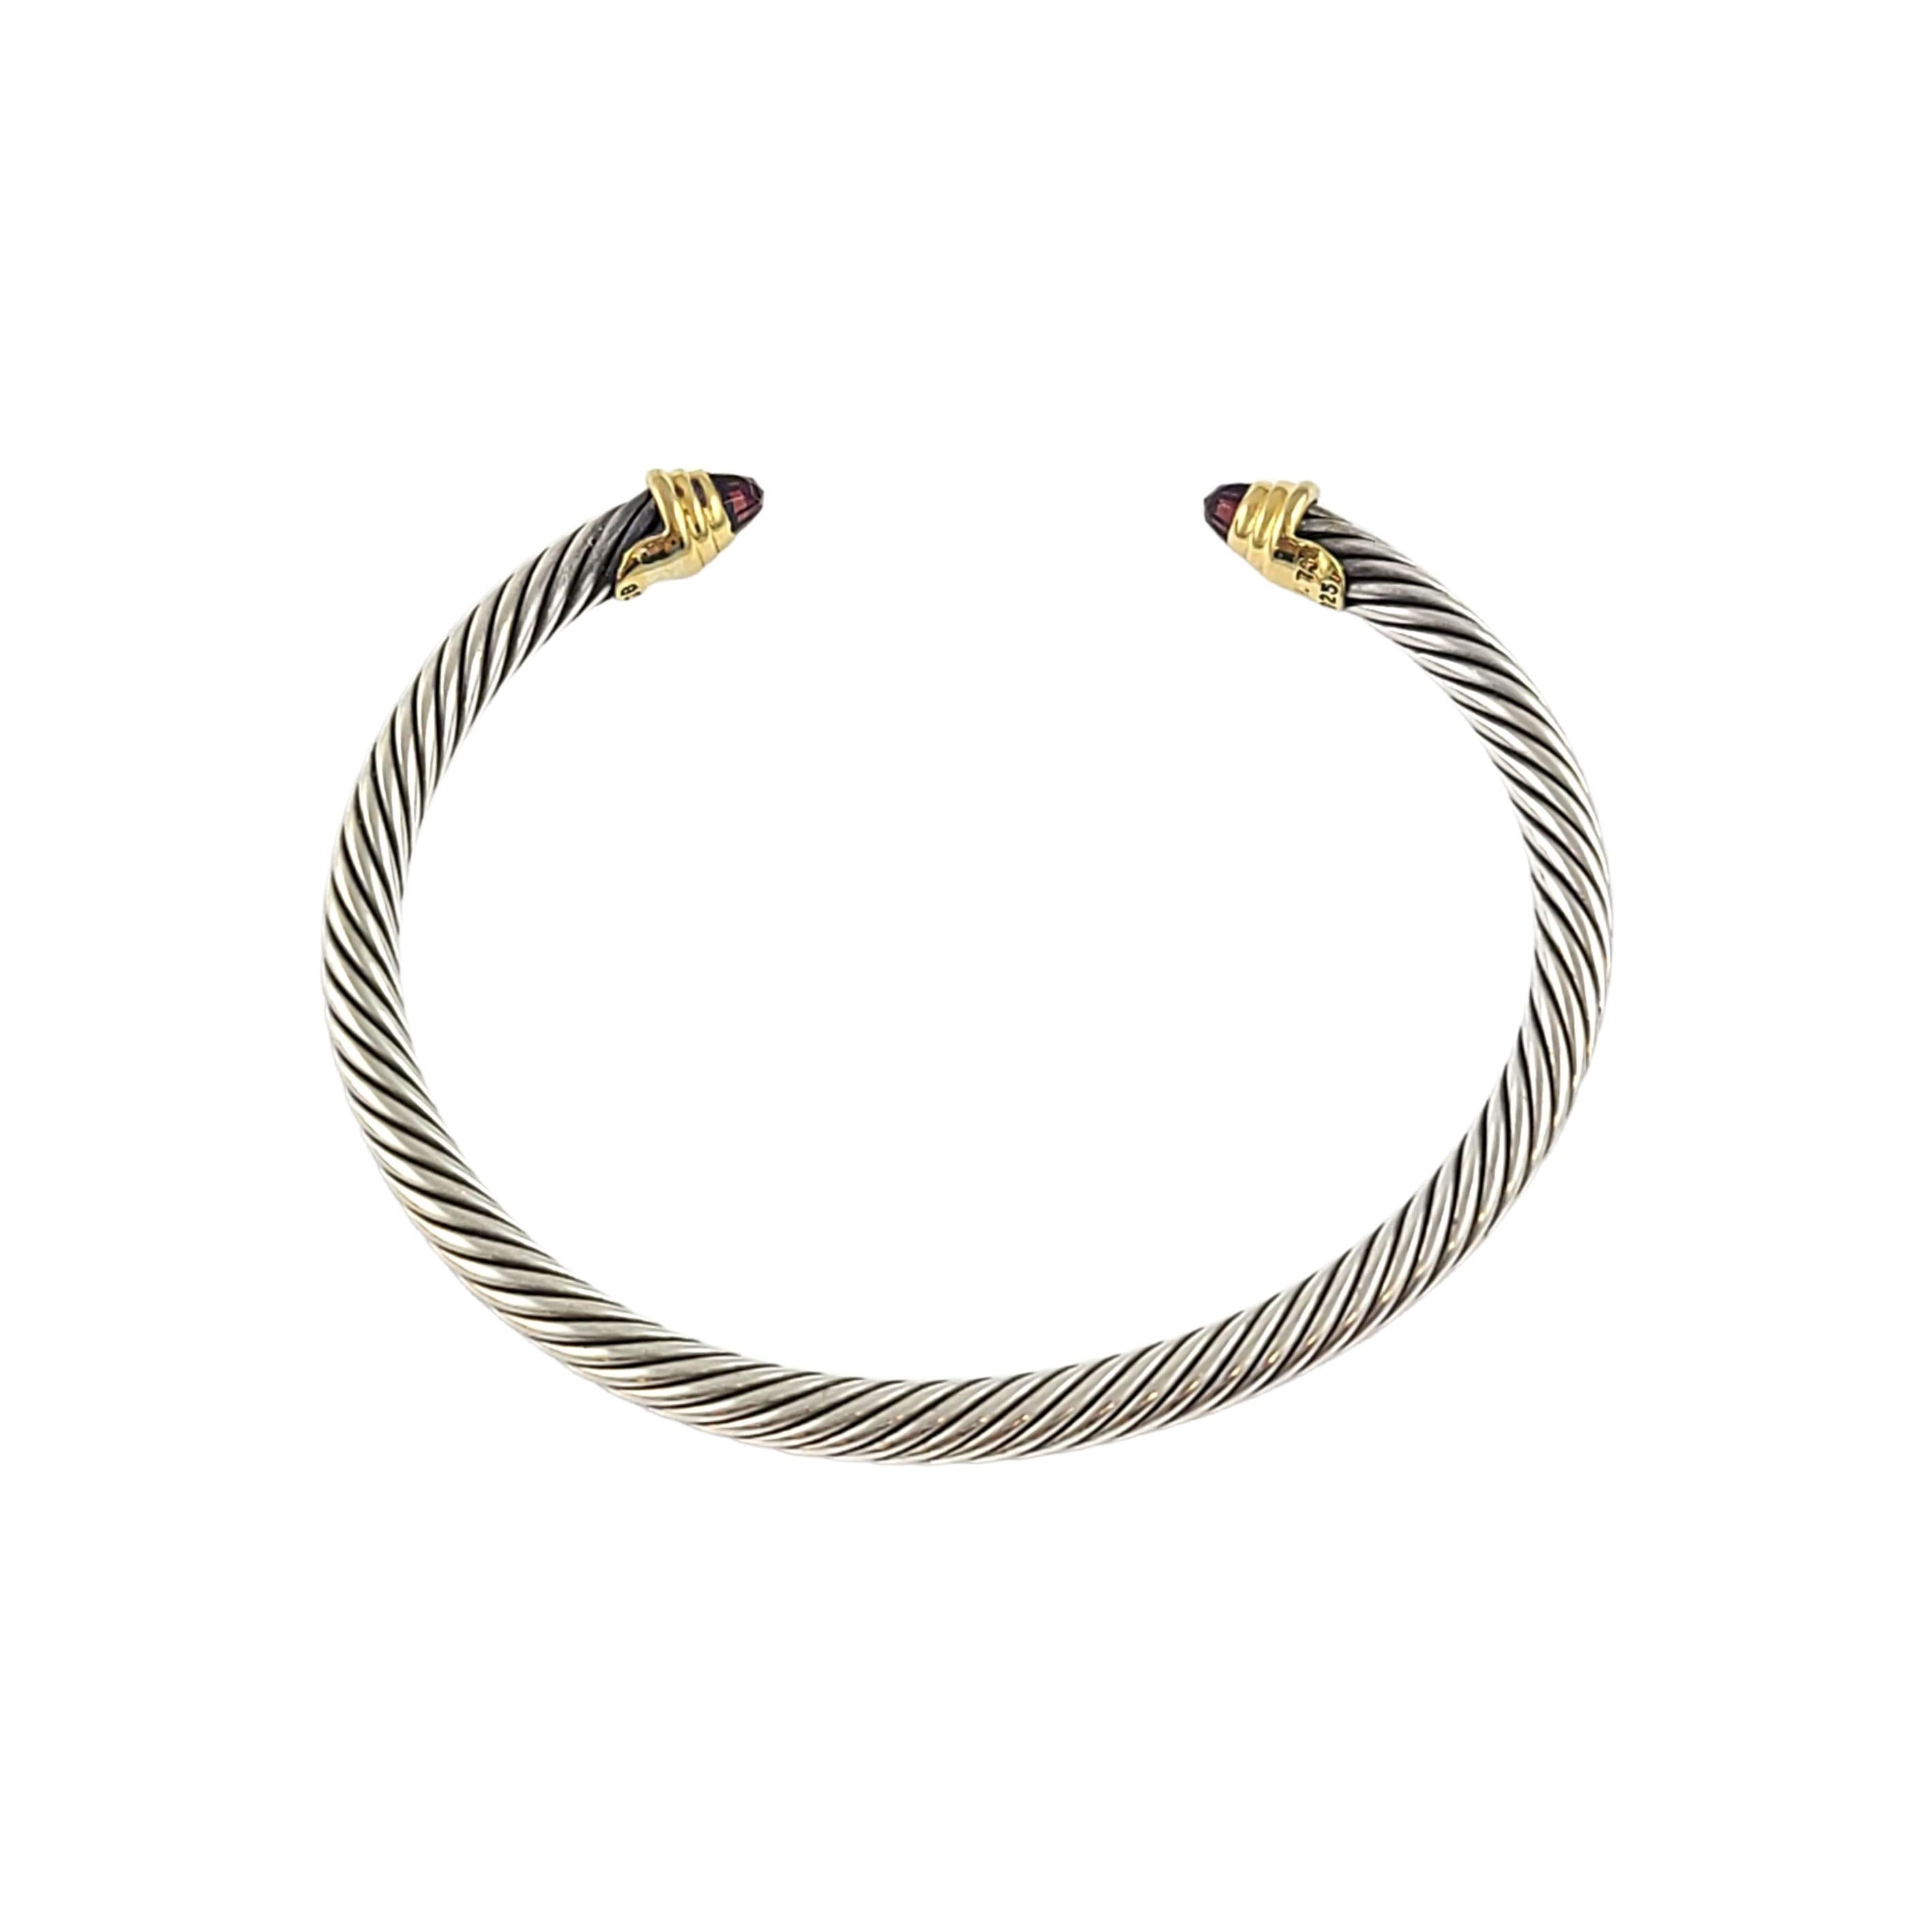 Sterling silver 18K yellow gold and garnet classic cable cuff bracelet by David Yurman.

Features Yurman's classic cable design in sterling silver with 18K yellow gold accent and a faceted garnet at each end.

Measures approx 6